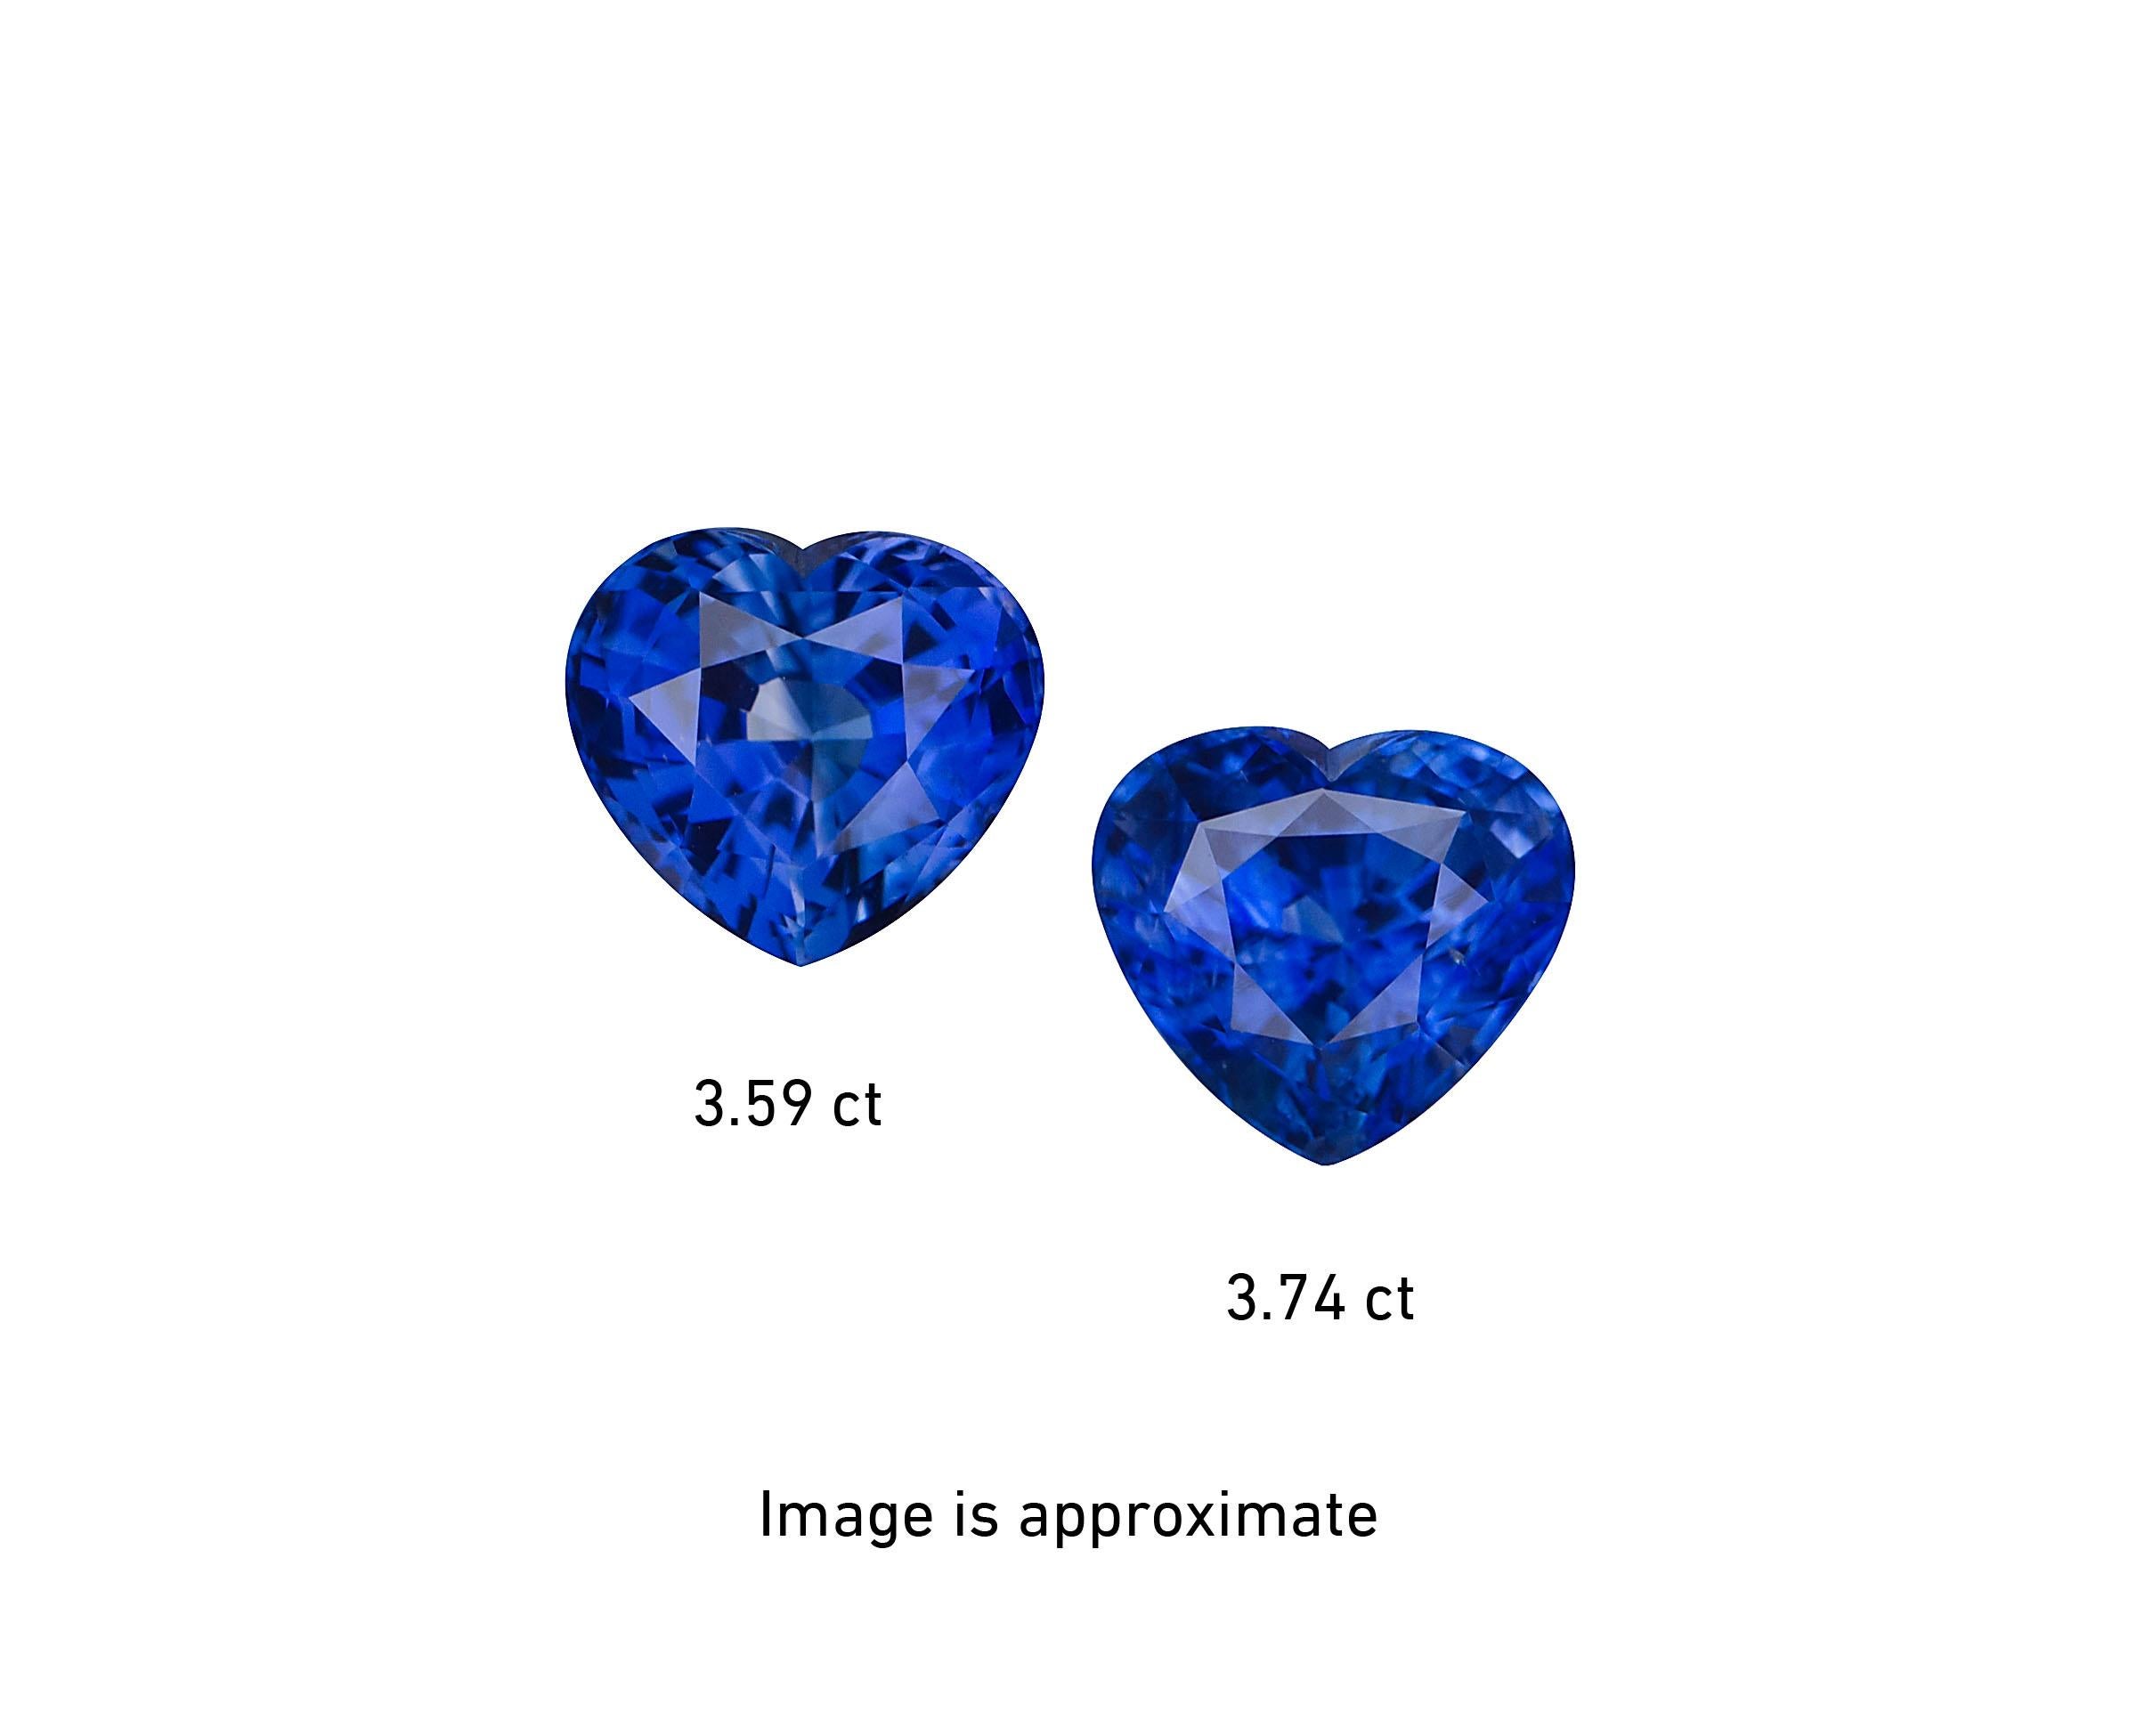 Earrings contain 2 finely matched GIA certified heart shape sapphires 7.33tcw, 2 round brilliant diamonds 0.55tcw and 58 round brilliant diamonds 0.60tcw. Gemstones and diamonds hang from a quarter inch diamond lever back wire closure. Diamonds are